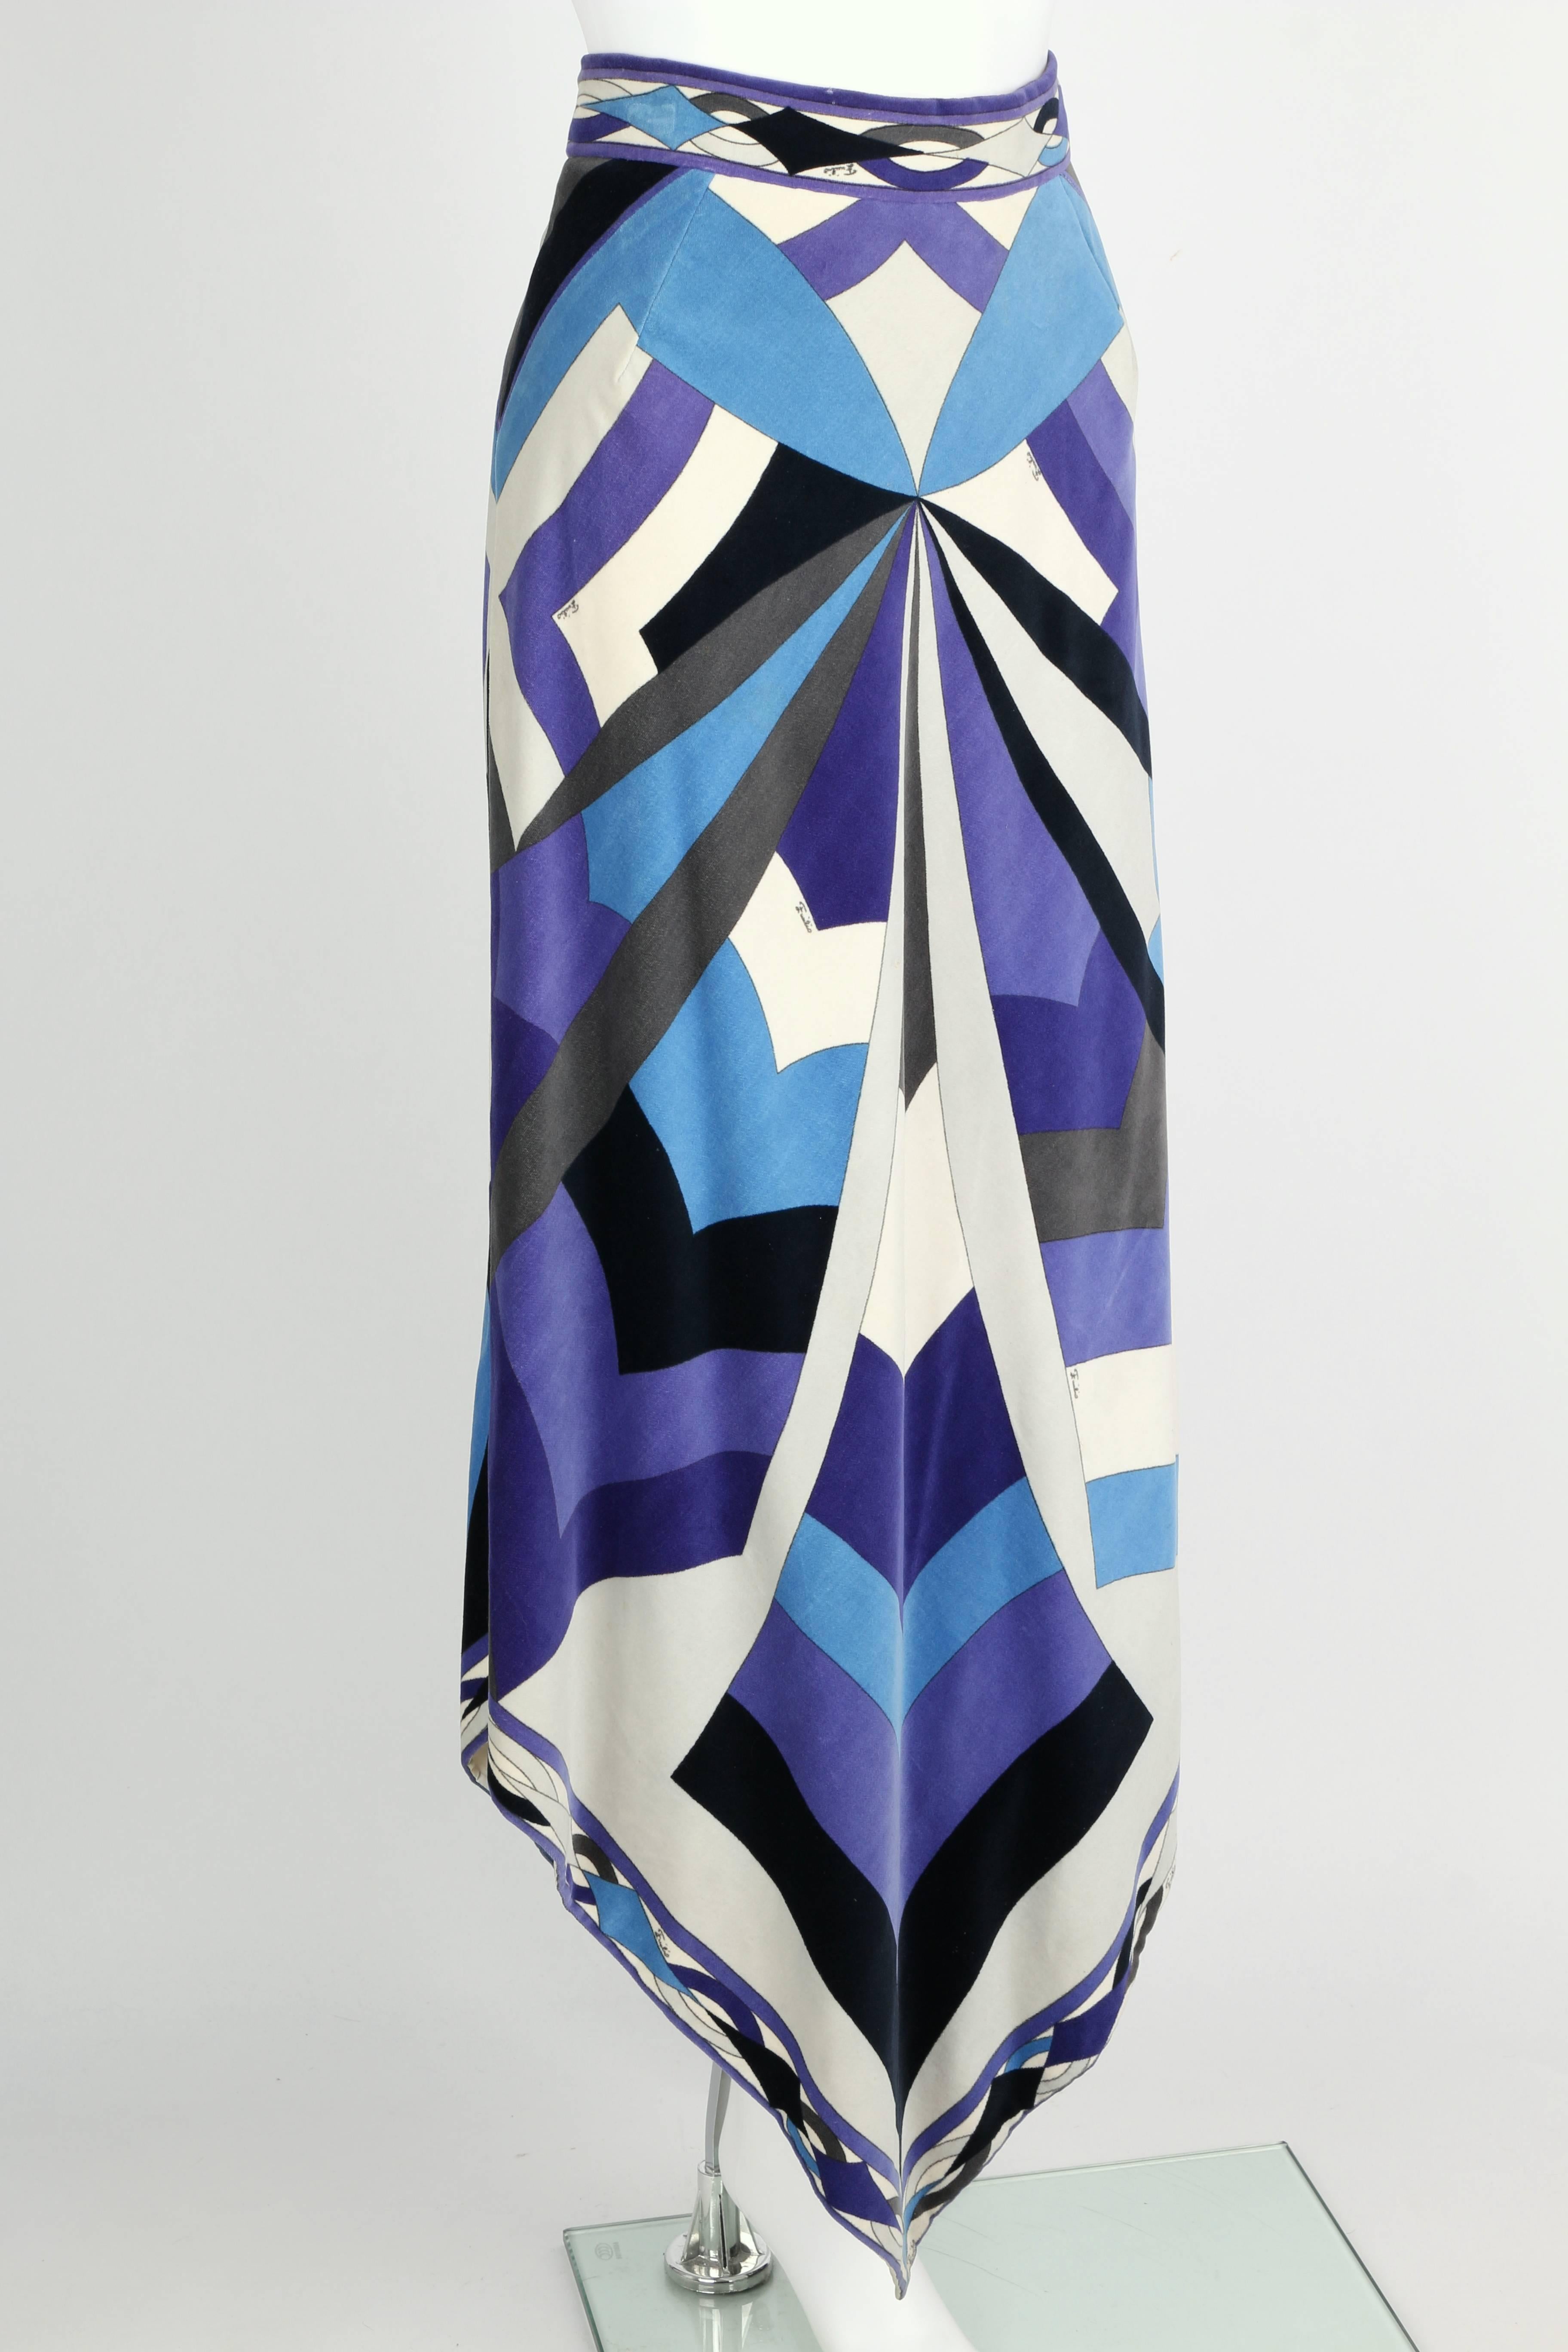 Vintage late 1960s Emilio Pucci blue, purple, gray and ivory geometric signature print velvet skirt. Scarf hemline comes to a point at the center on front and back. Skirt closes at the hip with zipper and hooks/eyes. Fully lined. Please note that